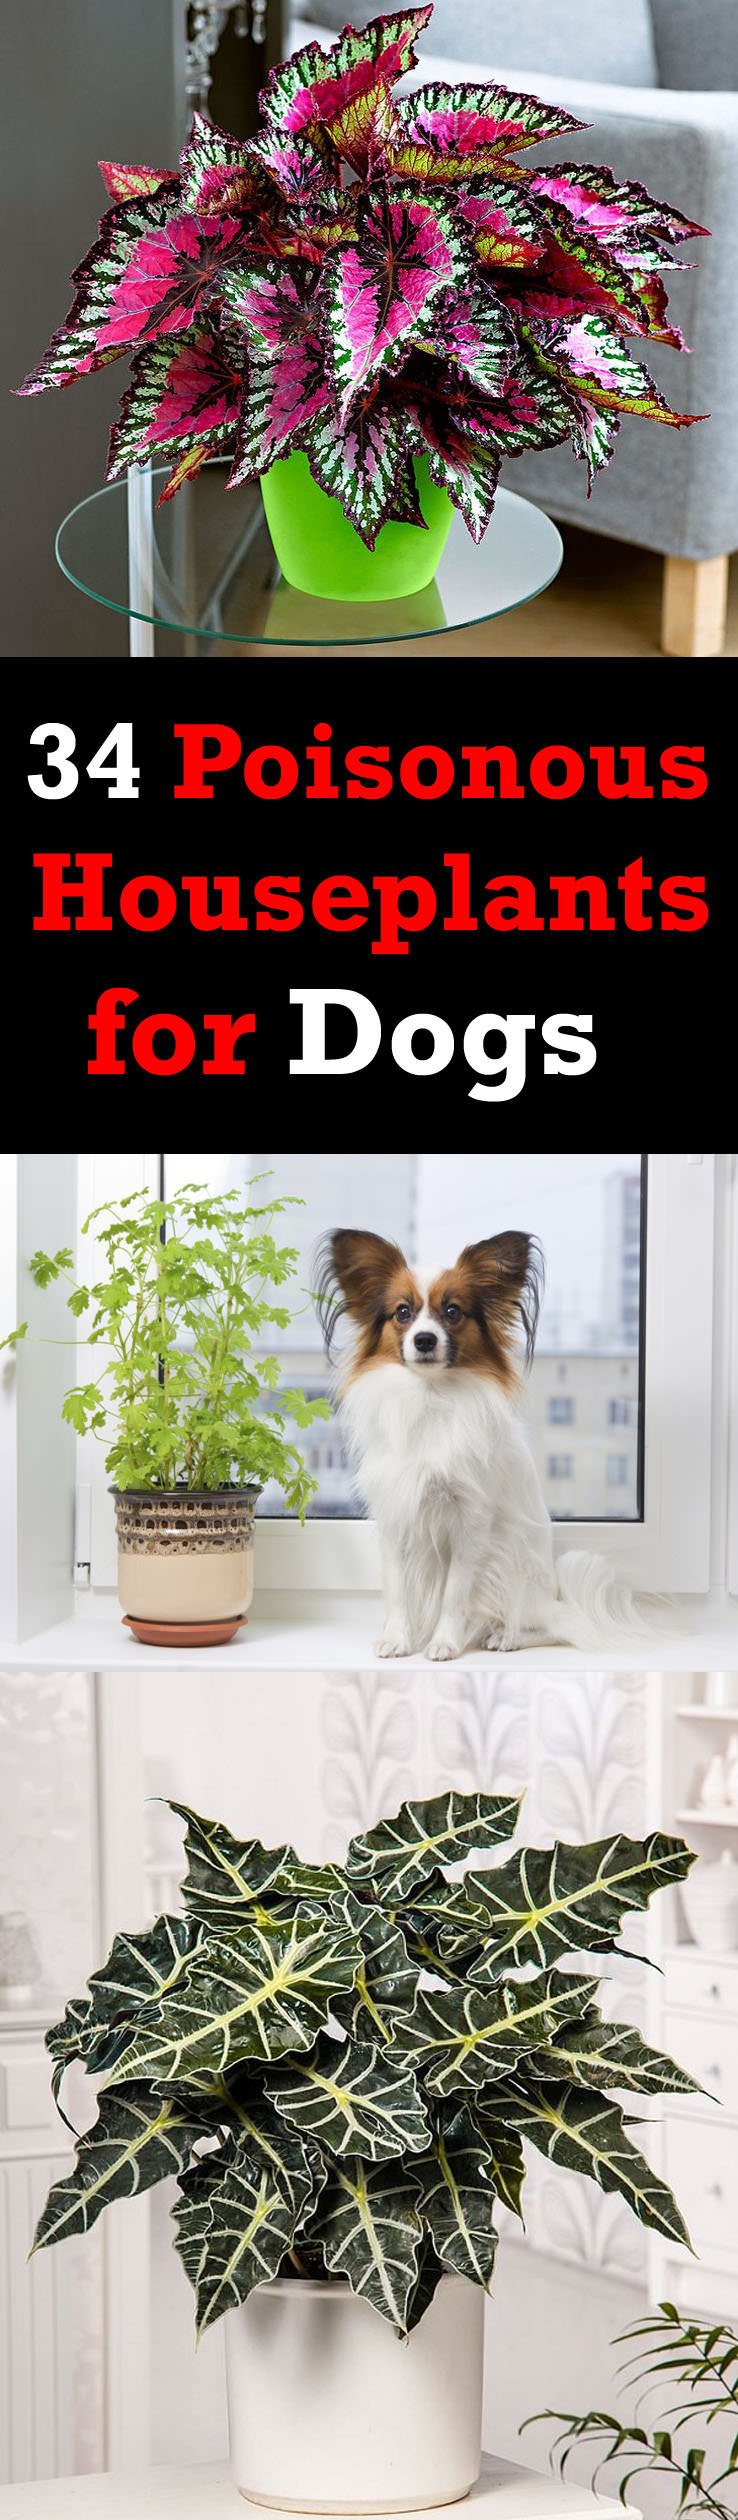 There are poisonous houseplants for dogs and cats. Some are mildly poisonous and some are fatal. It is better to know about them if you own a pet!